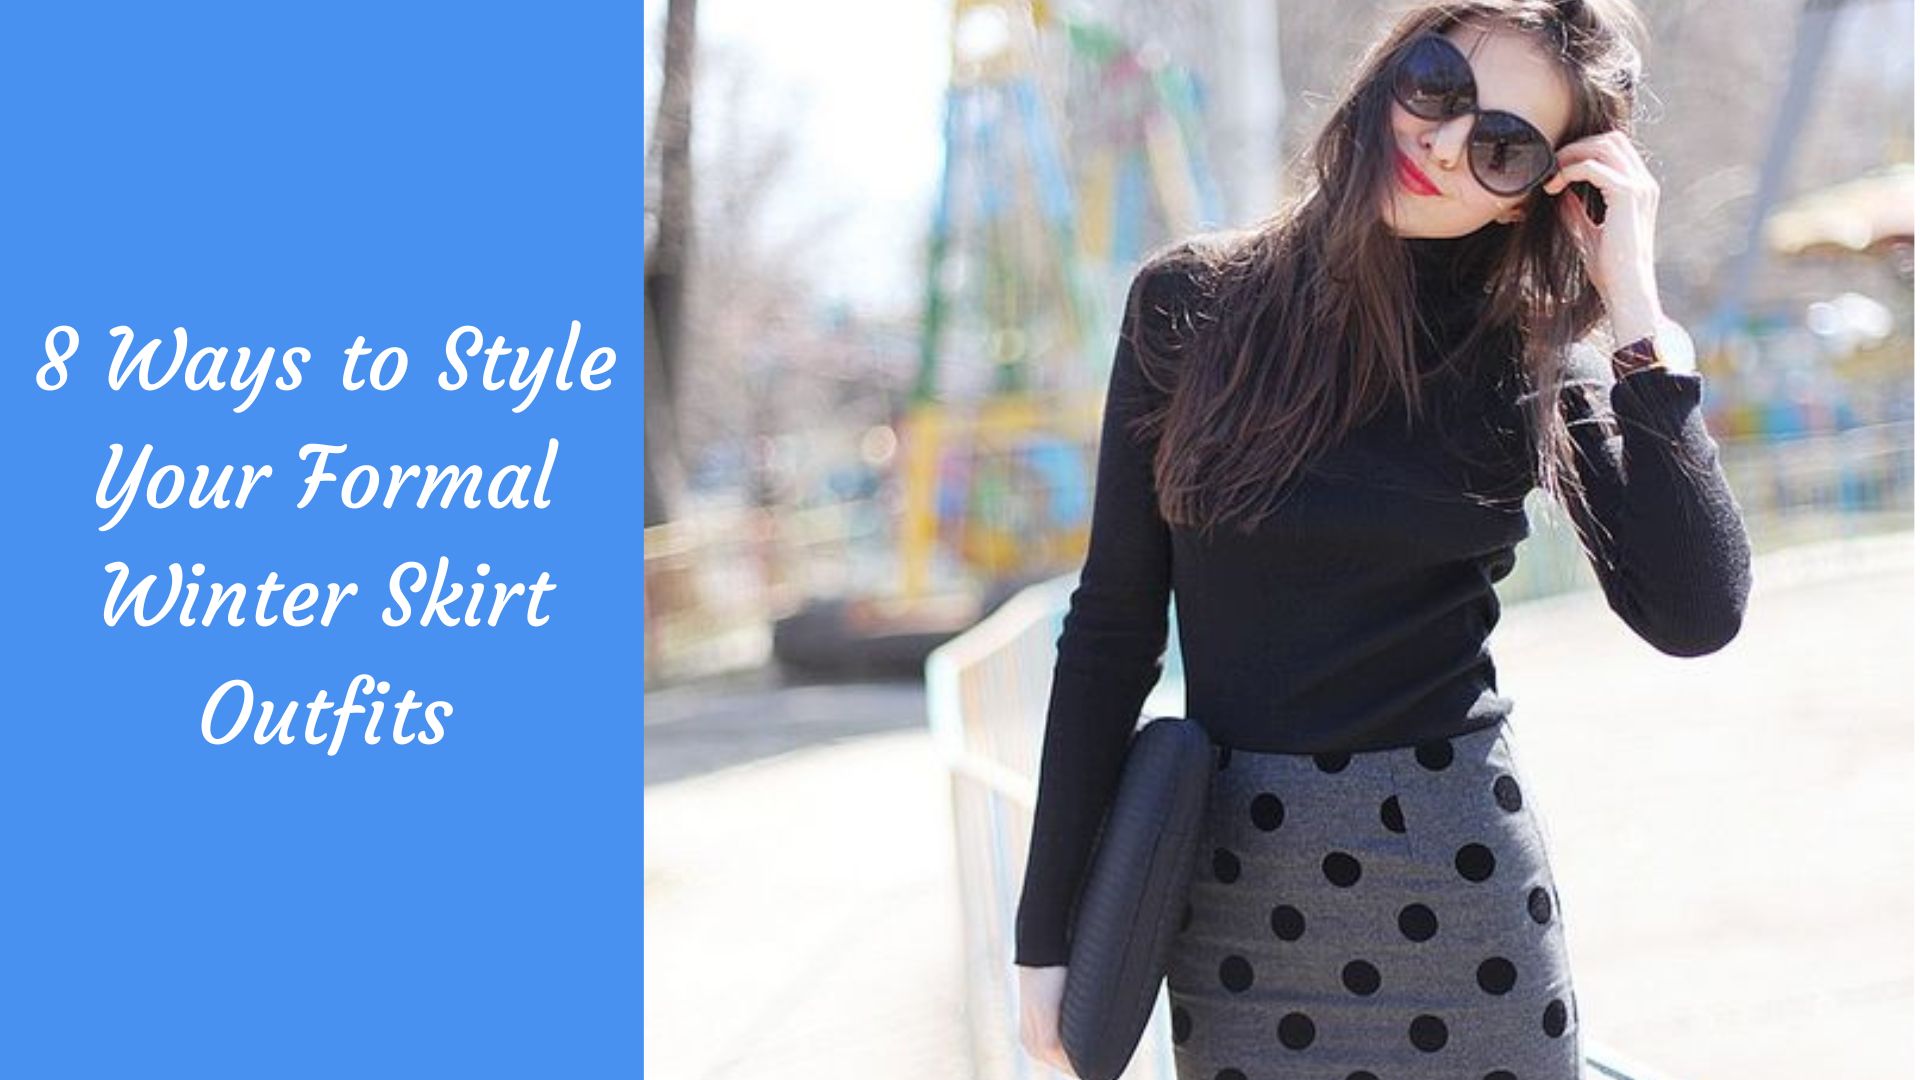 8 Ways to Style Your Formal Winter Skirt Outfits